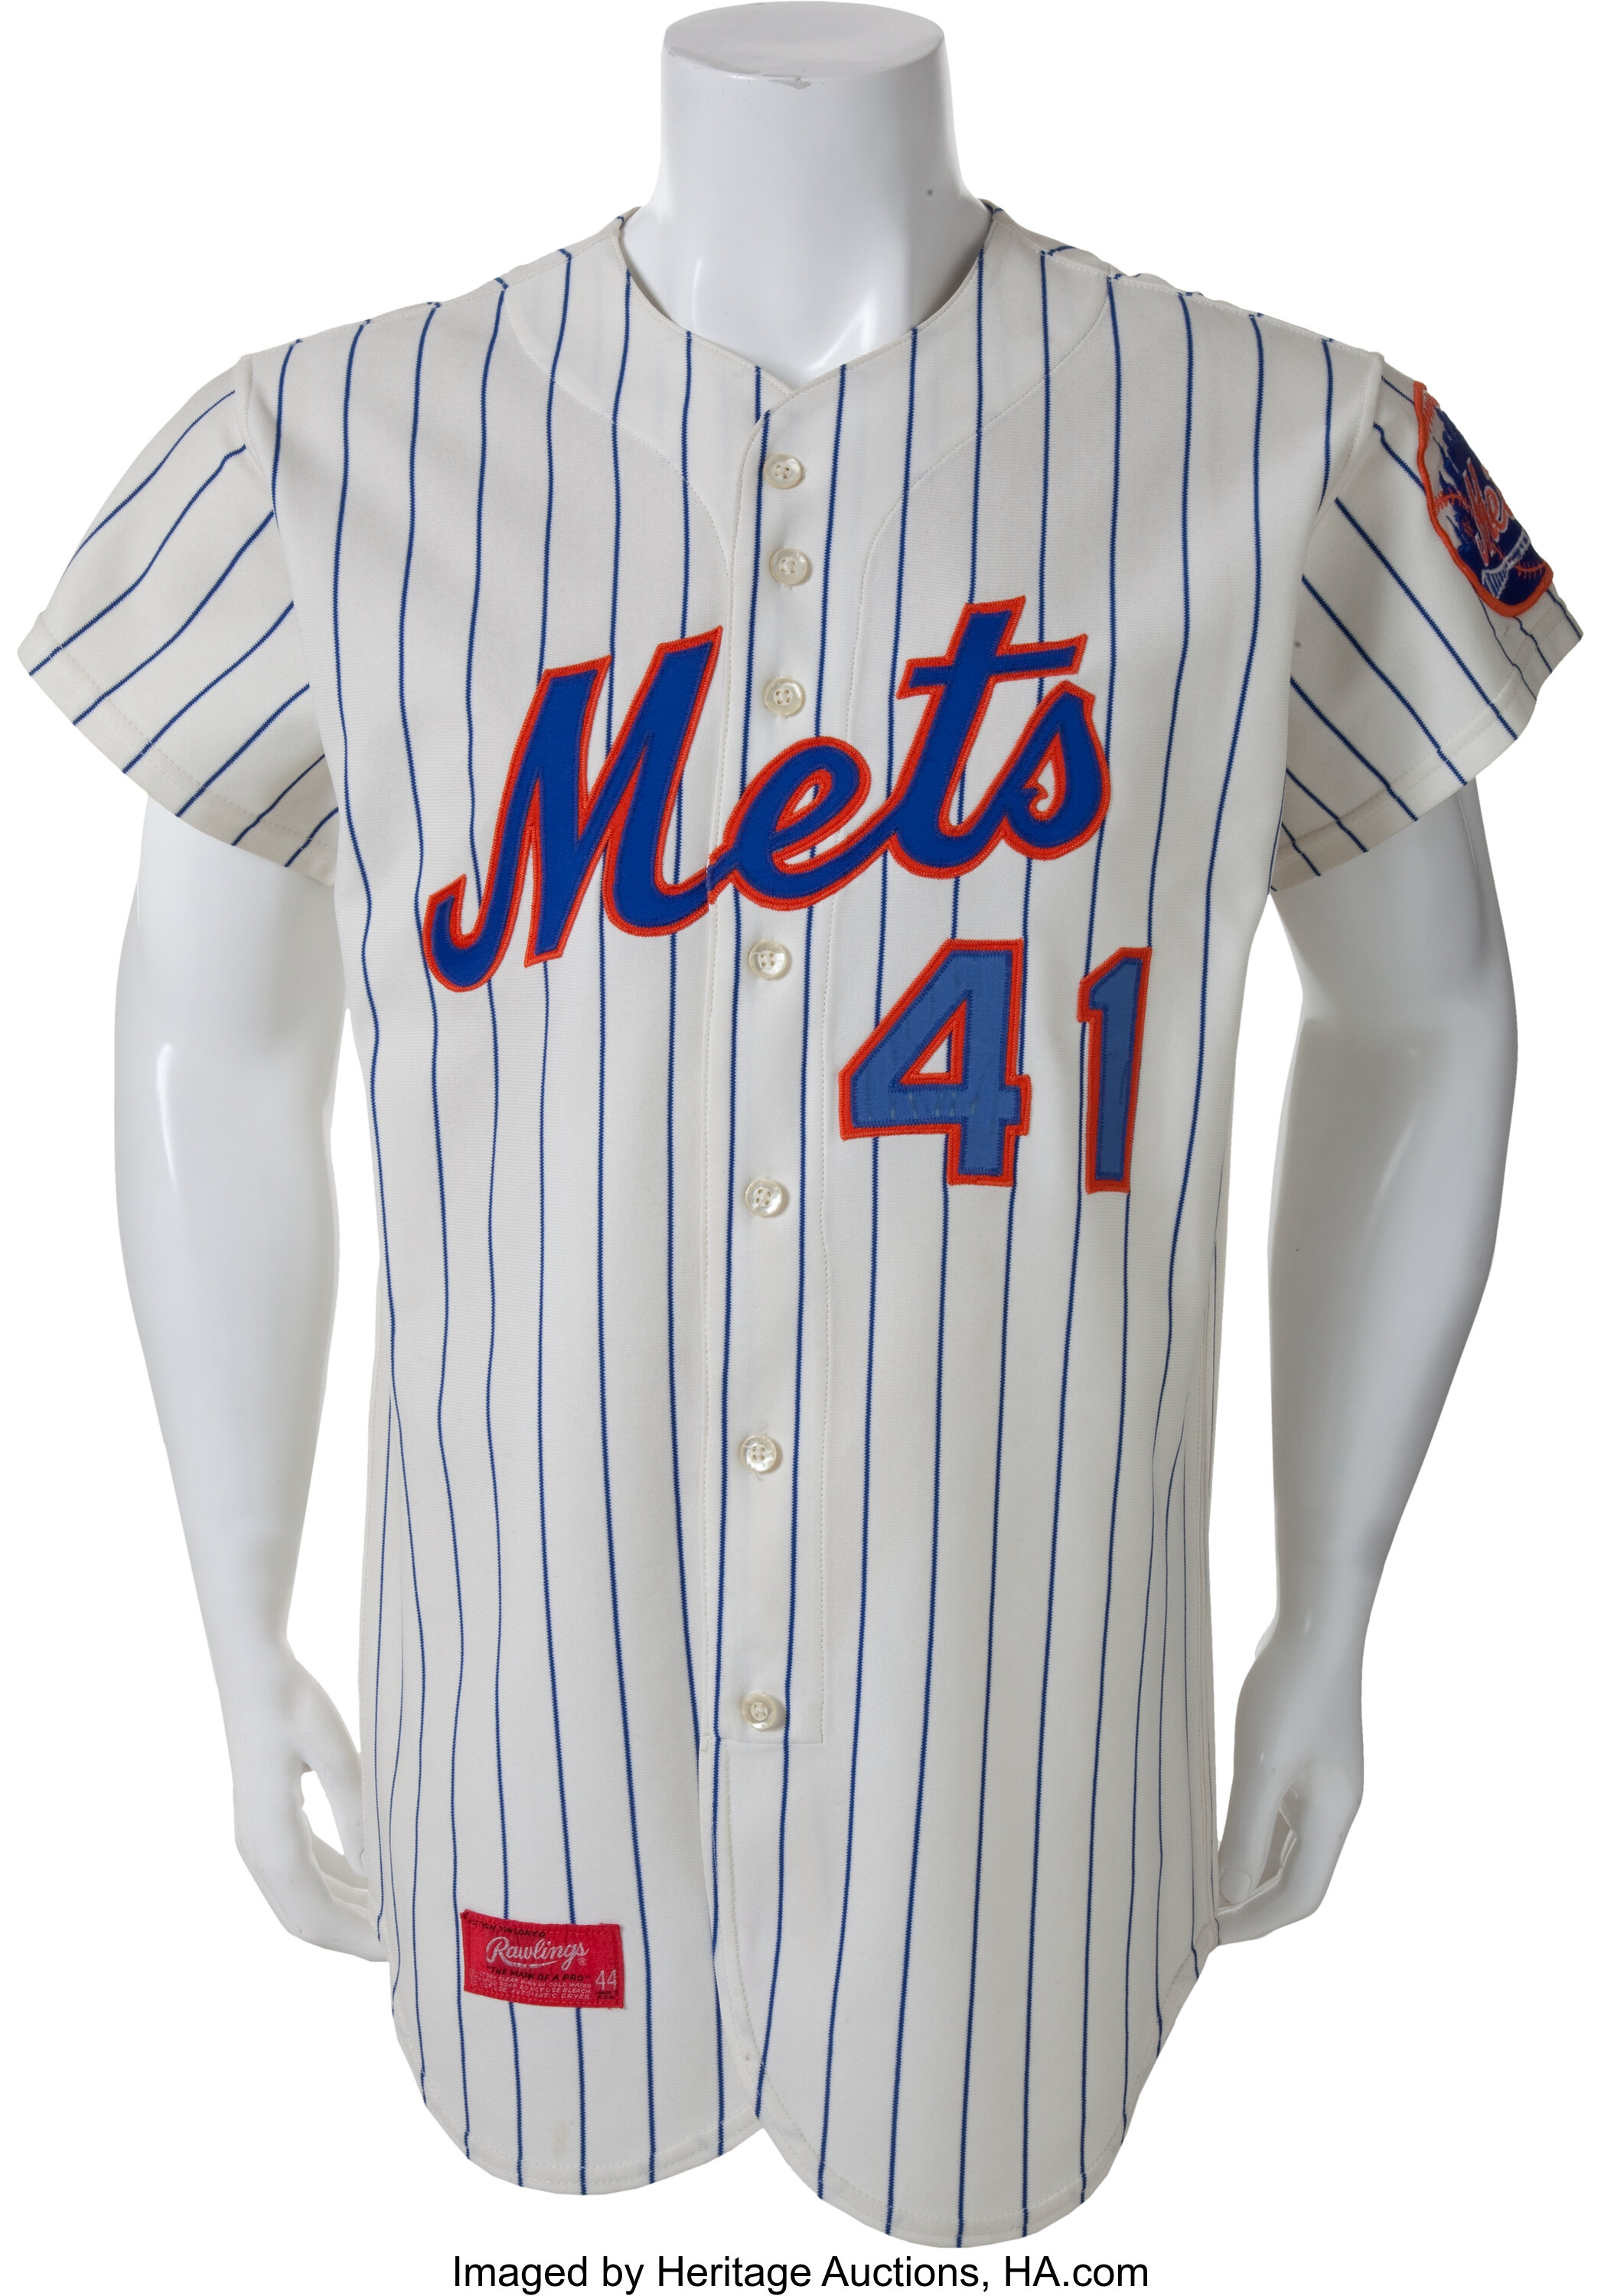 1973 Tom Seaver Game Worn New York Mets Jersey from Cy Young